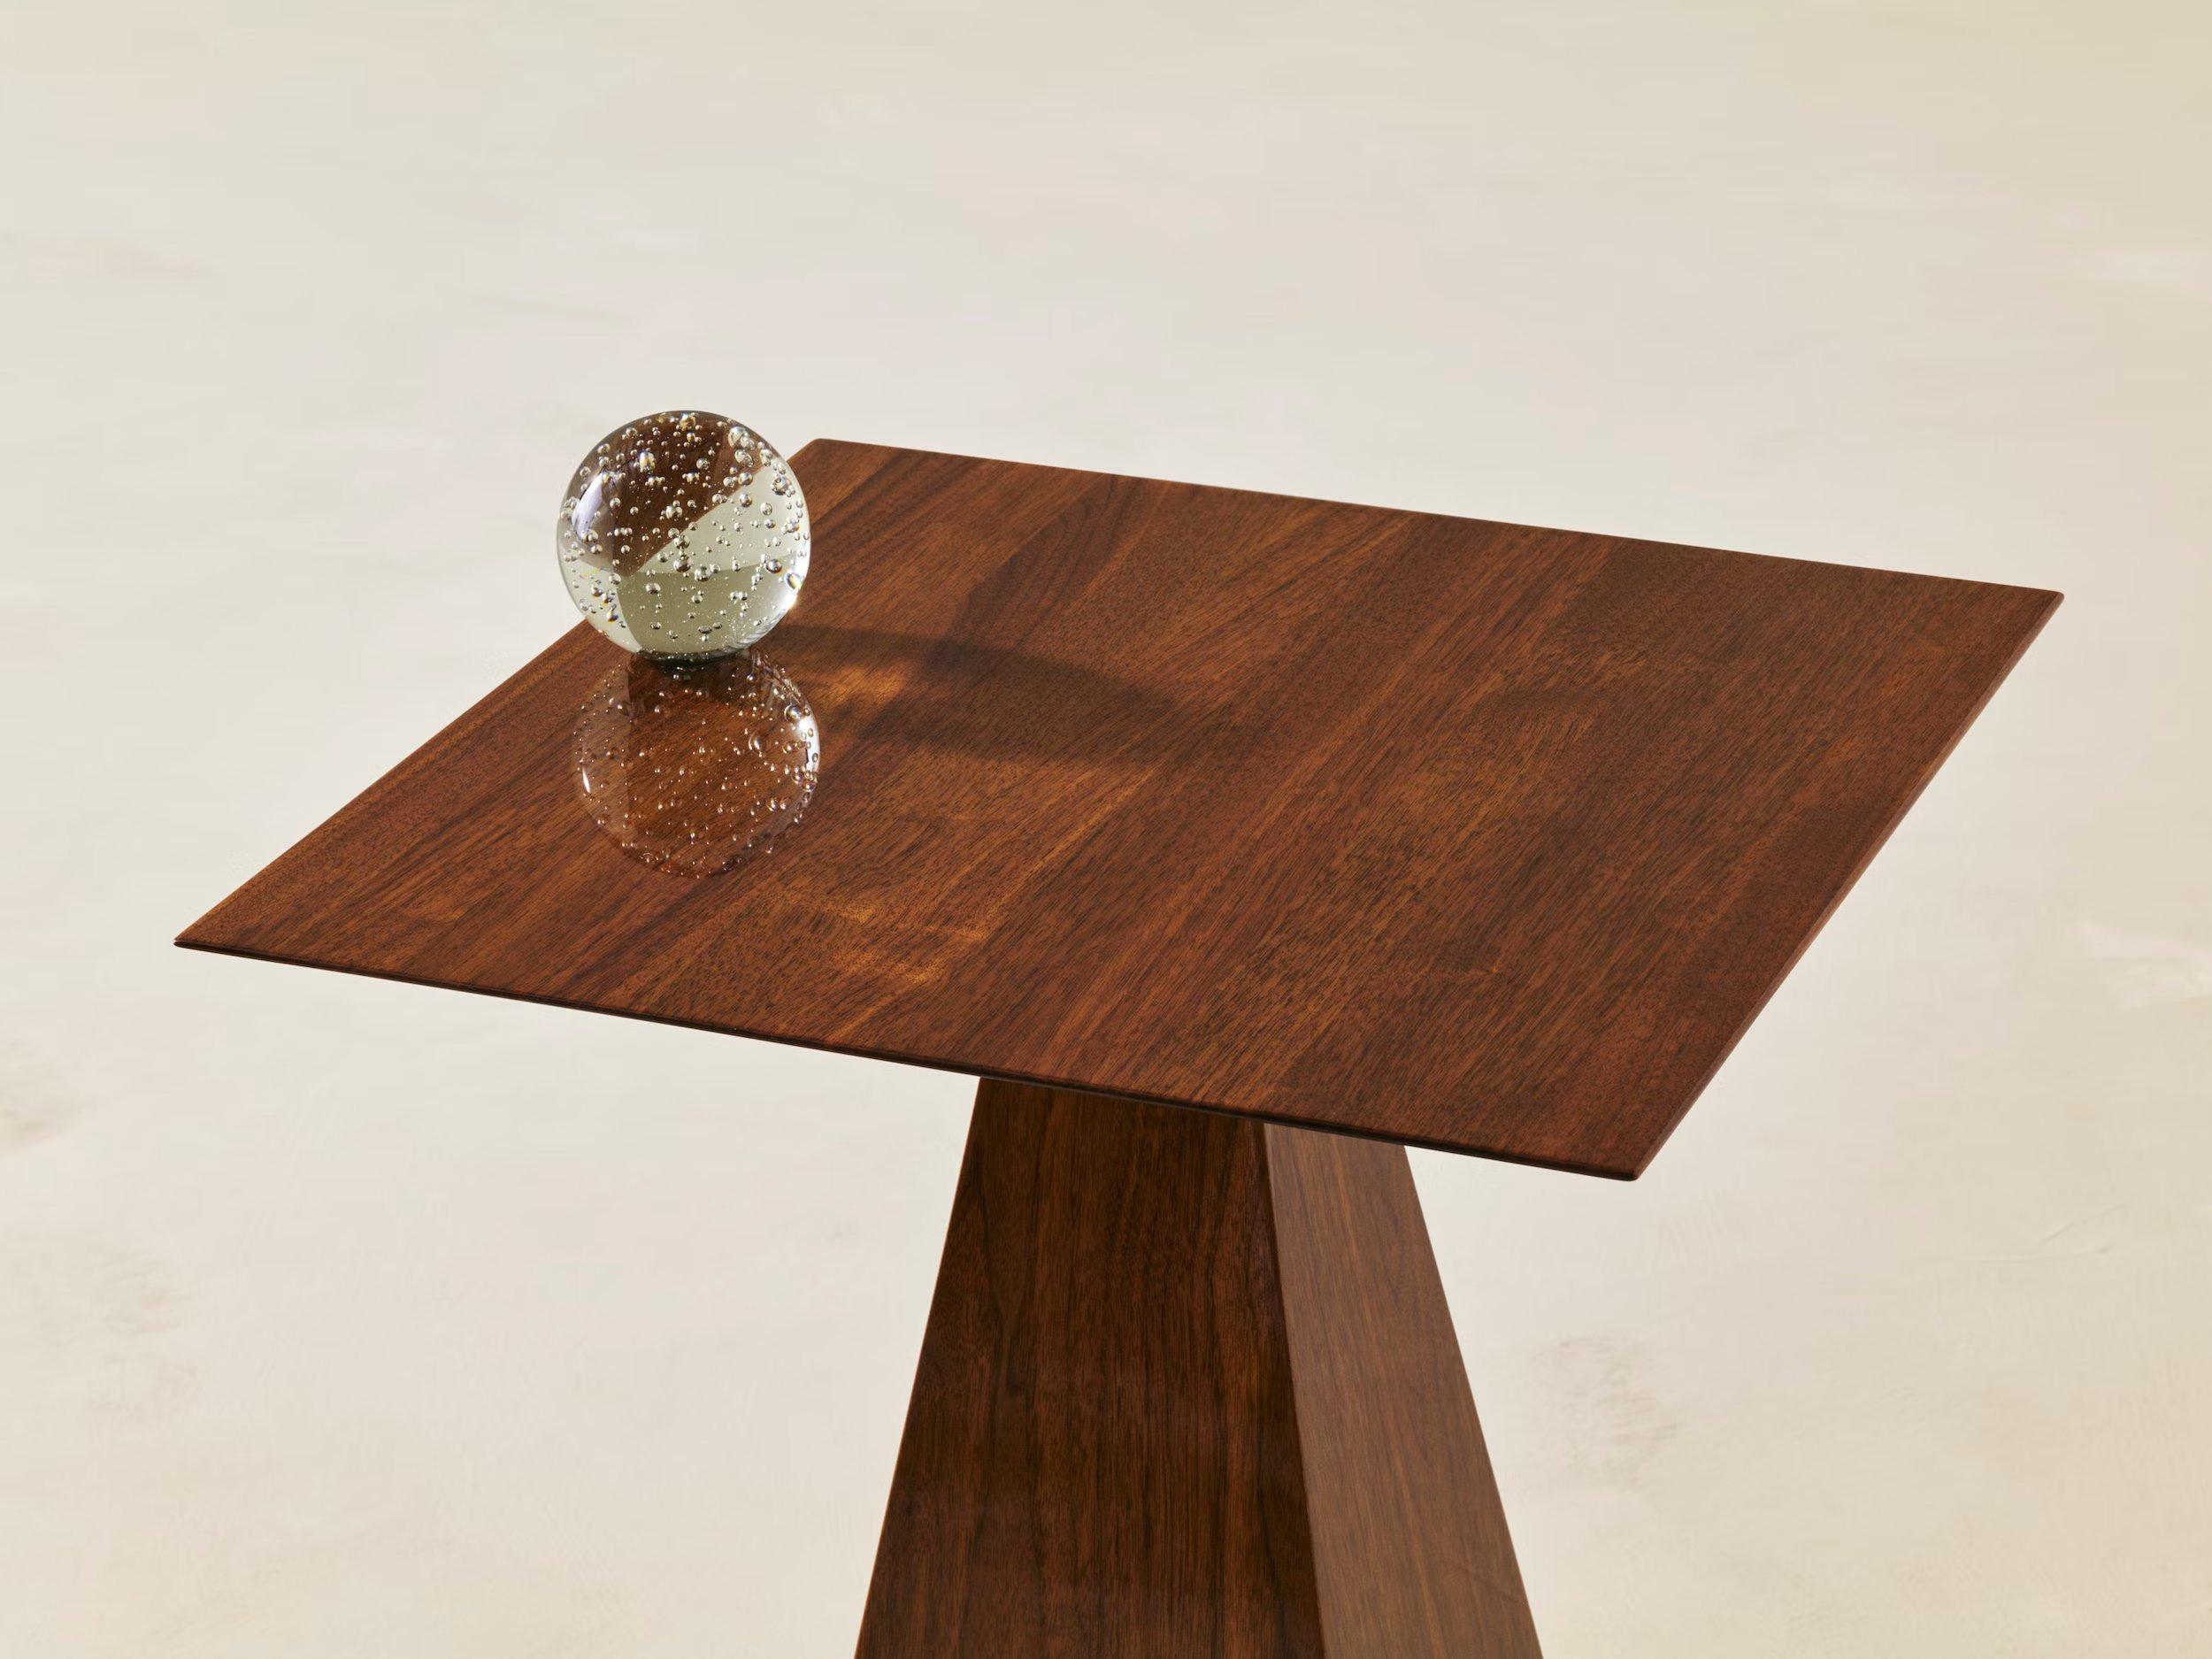 A sculptural side table with crisp corners and precise angles that reach up to support the finely edged tabletop, showcasing the wood grain beautifully. The SFS (Small Finicky Square Side Table) is a deceptively simple design that focuses attention